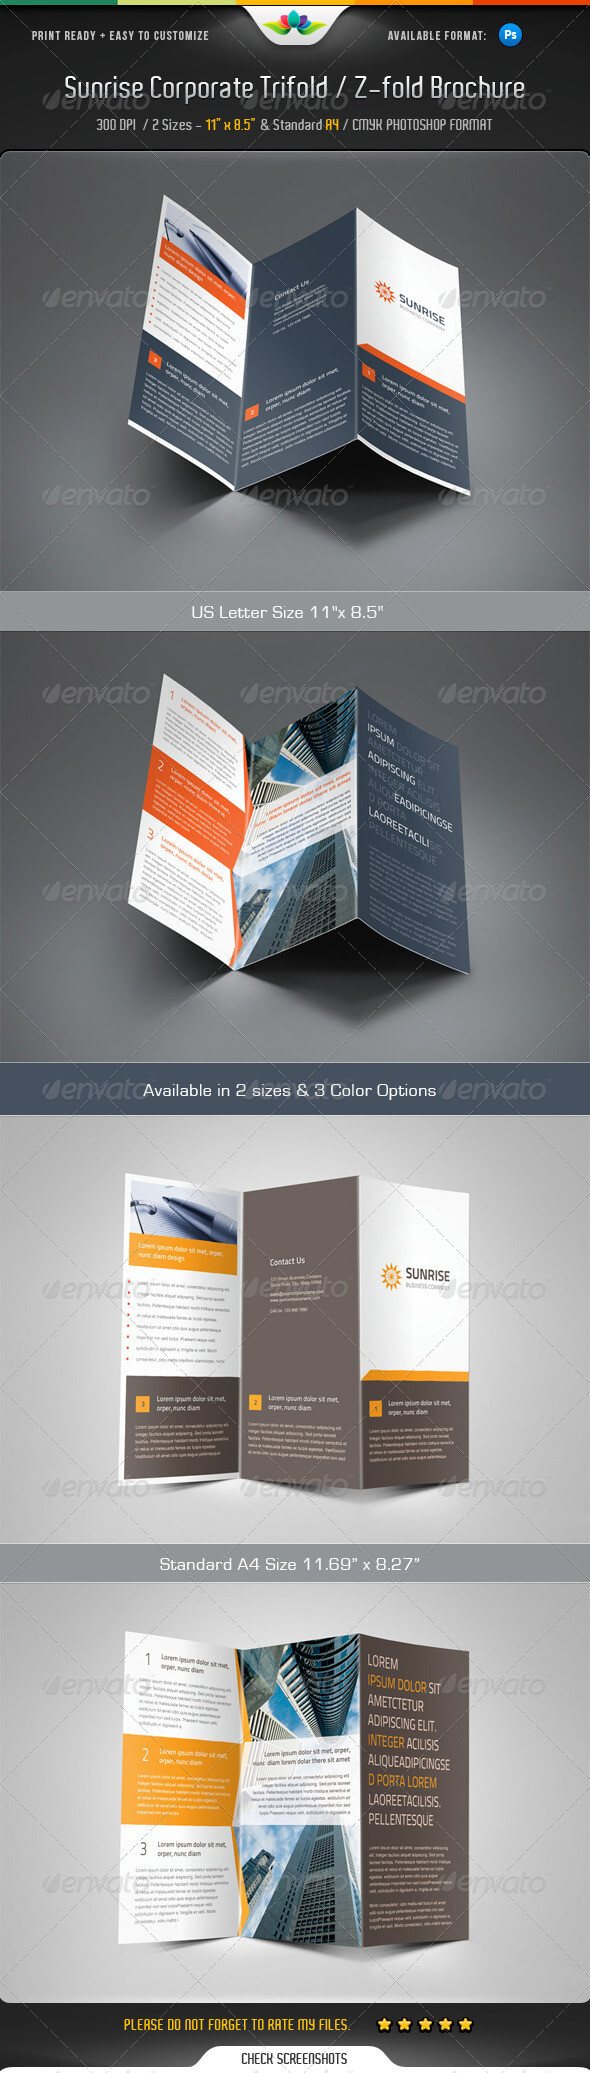 Z Fold Brochure Templates From Graphicriver In Z Fold Brochure Template Indesign